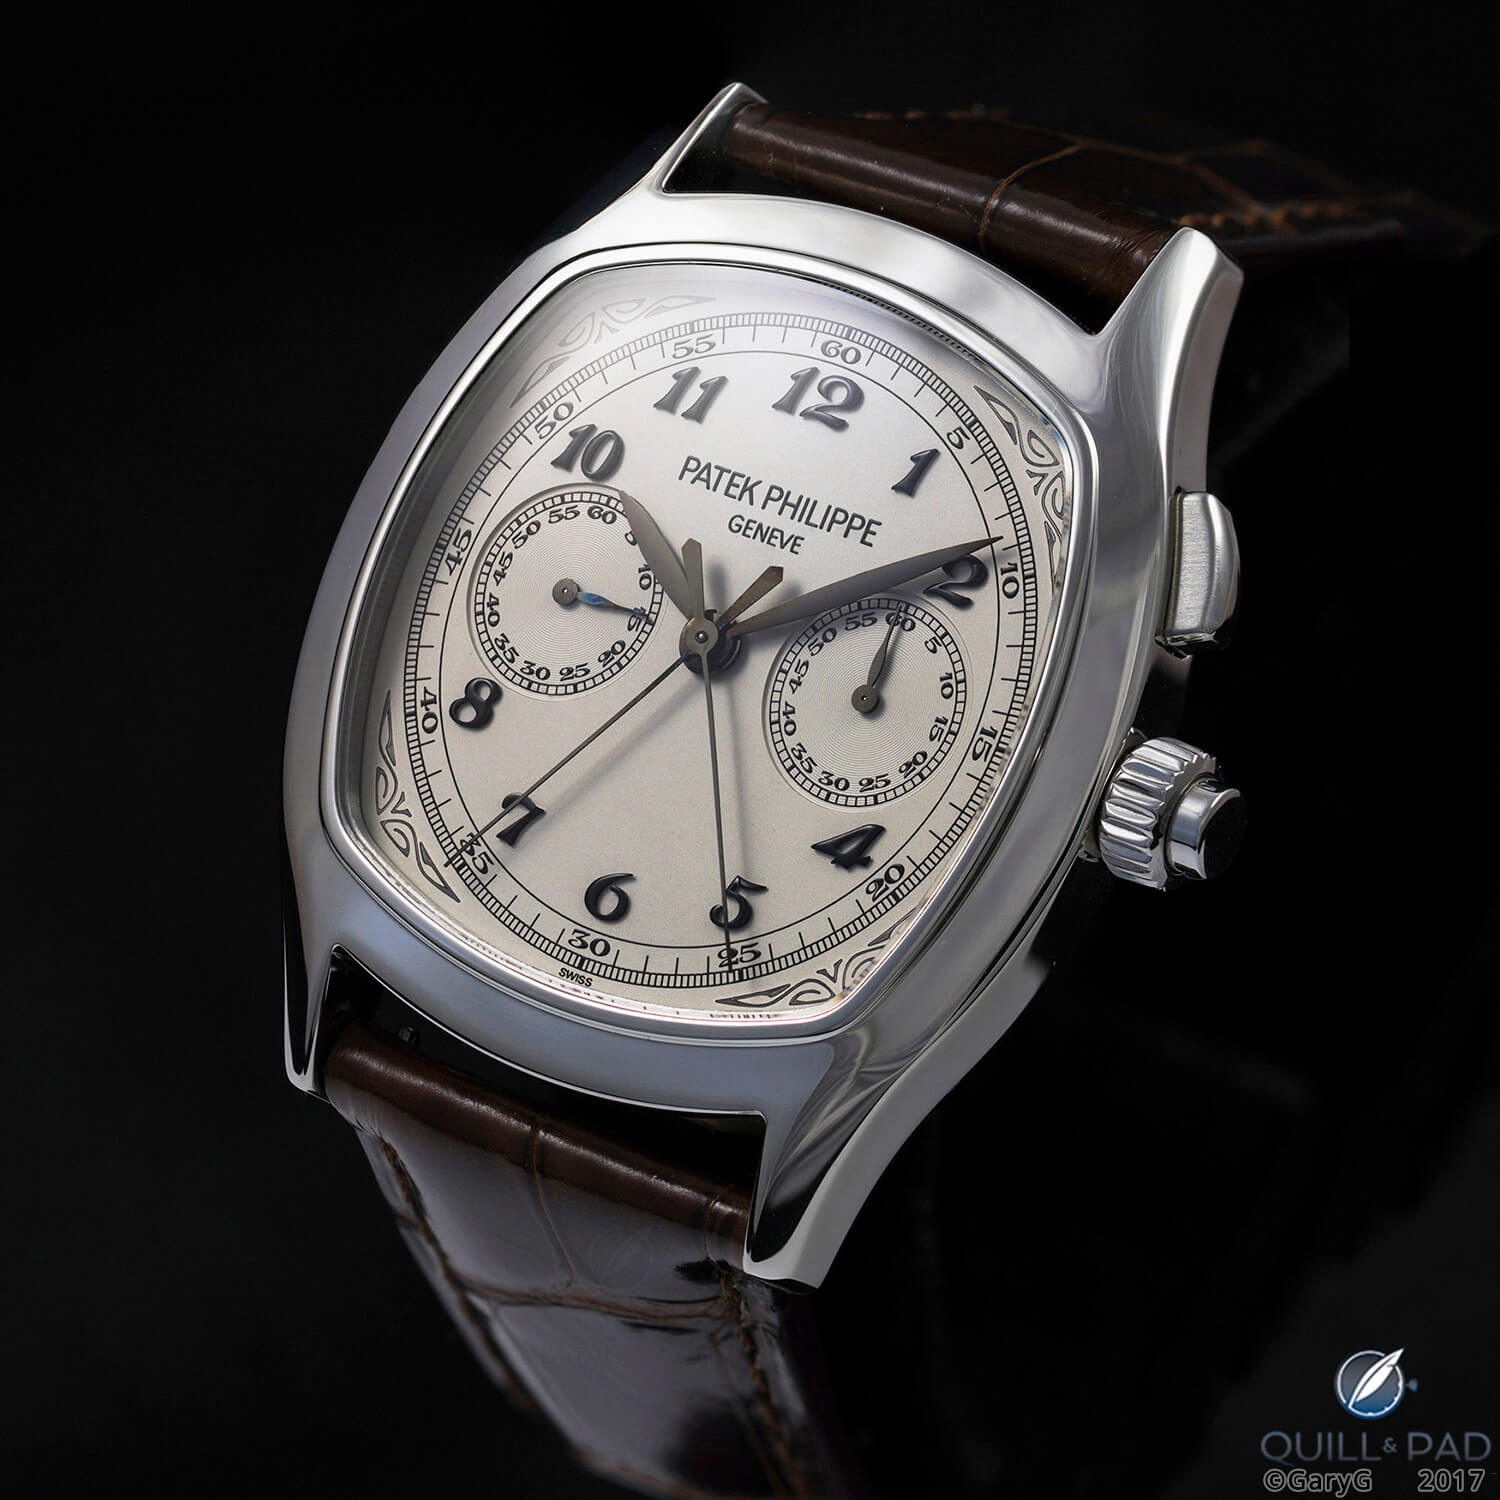 Details that matter: Patek Philippe Reference 5950 with applied Breguet numerals